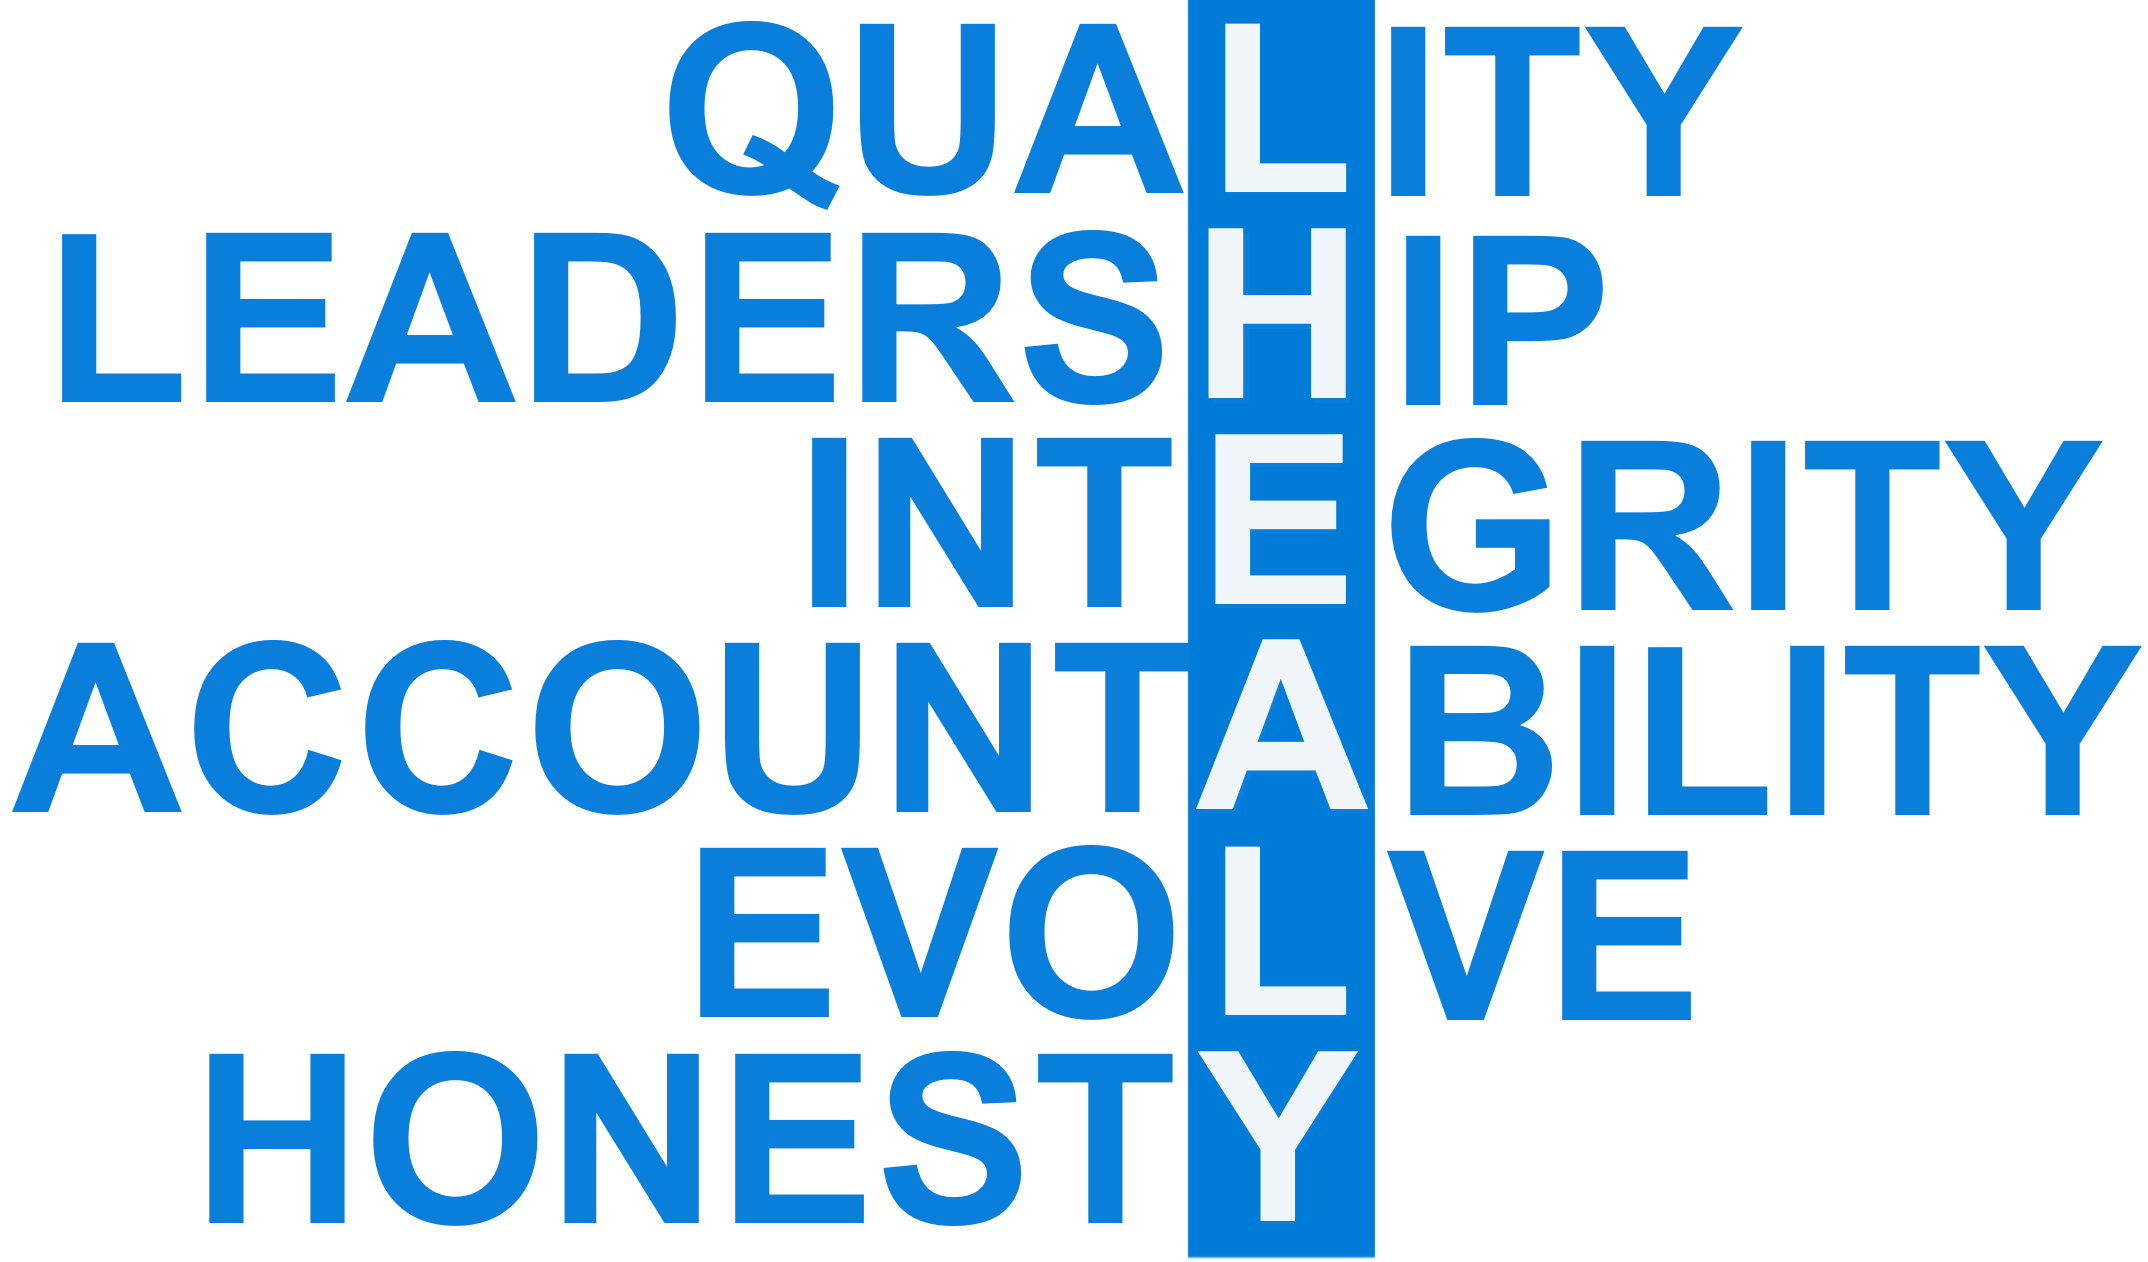 Infographic depicting qualities of L.Healy Ltd.